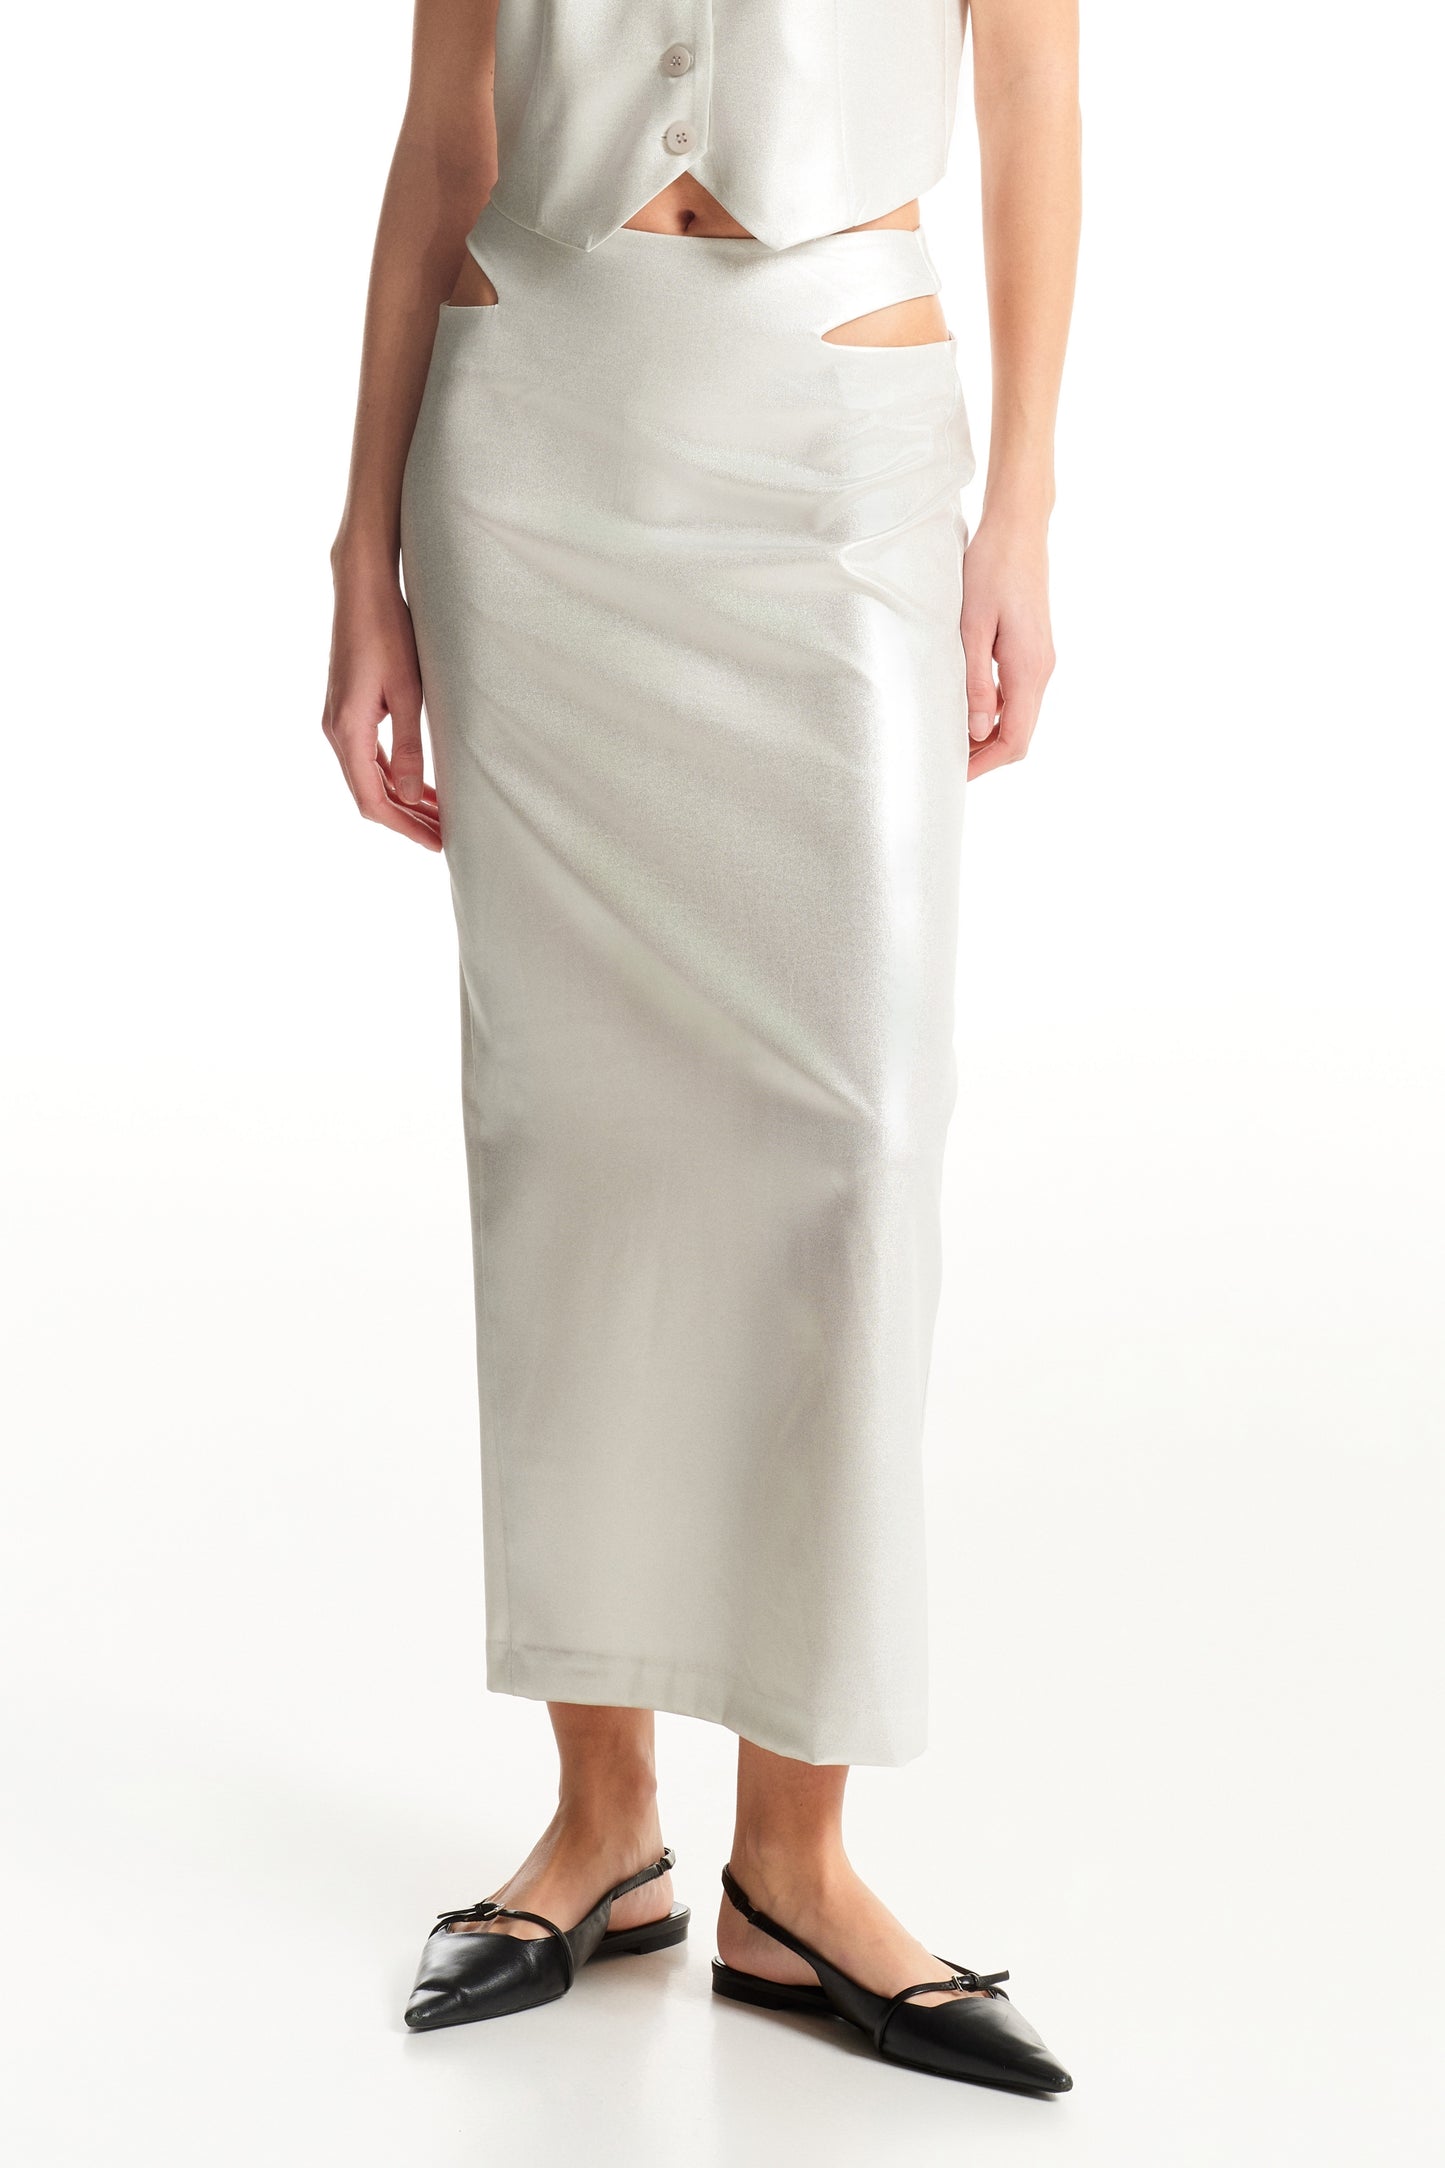 Pencil skirt with cut out